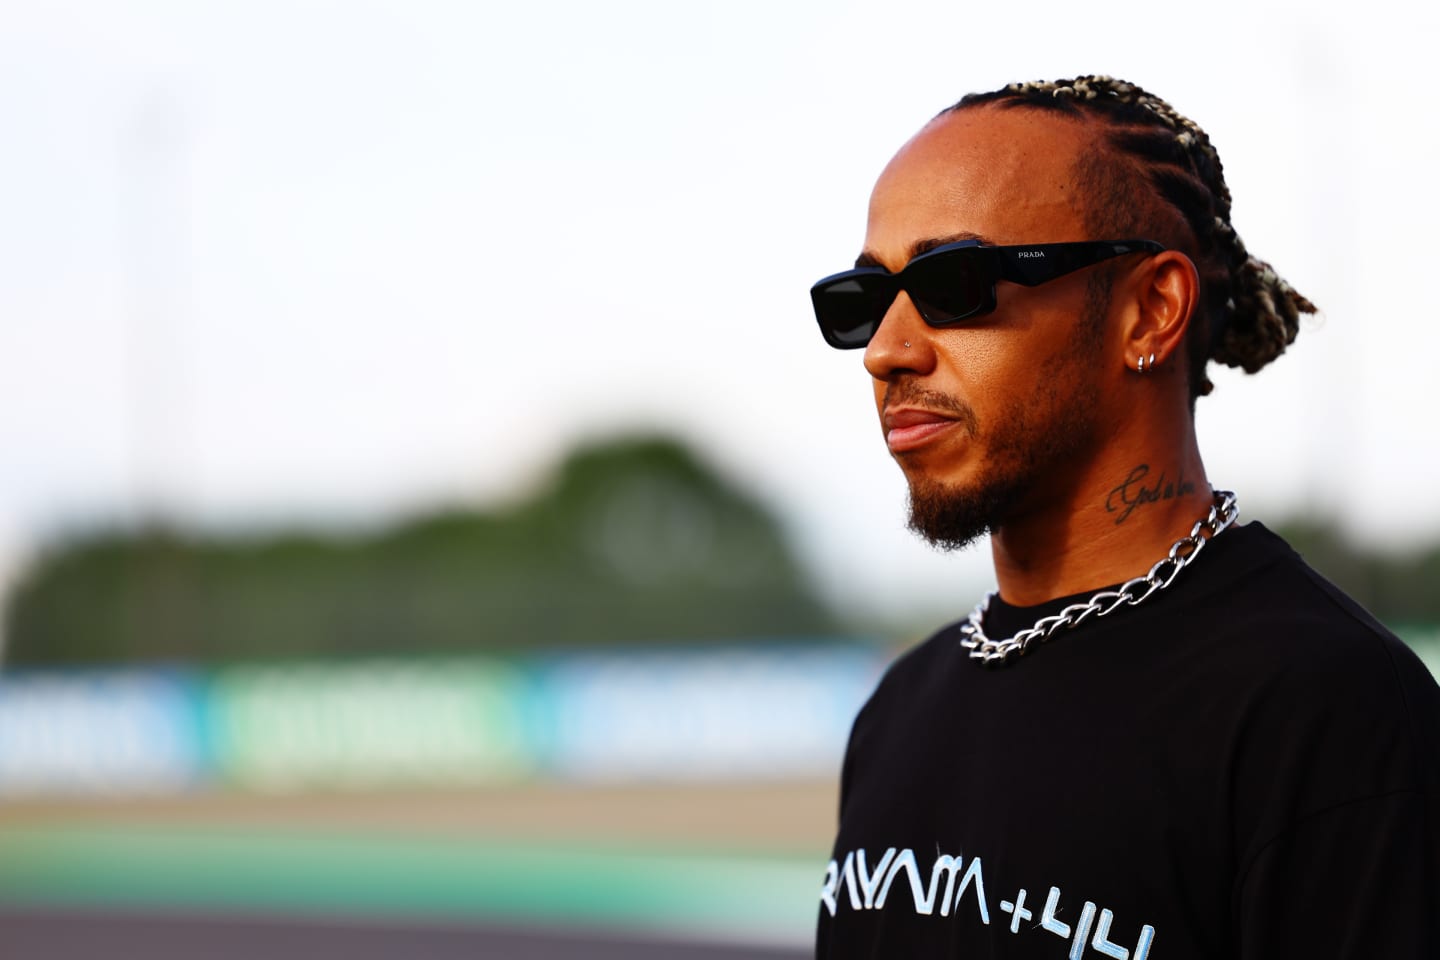 SUZUKA, JAPAN - SEPTEMBER 21: Lewis Hamilton of Great Britain and Mercedes looks on in the Paddock